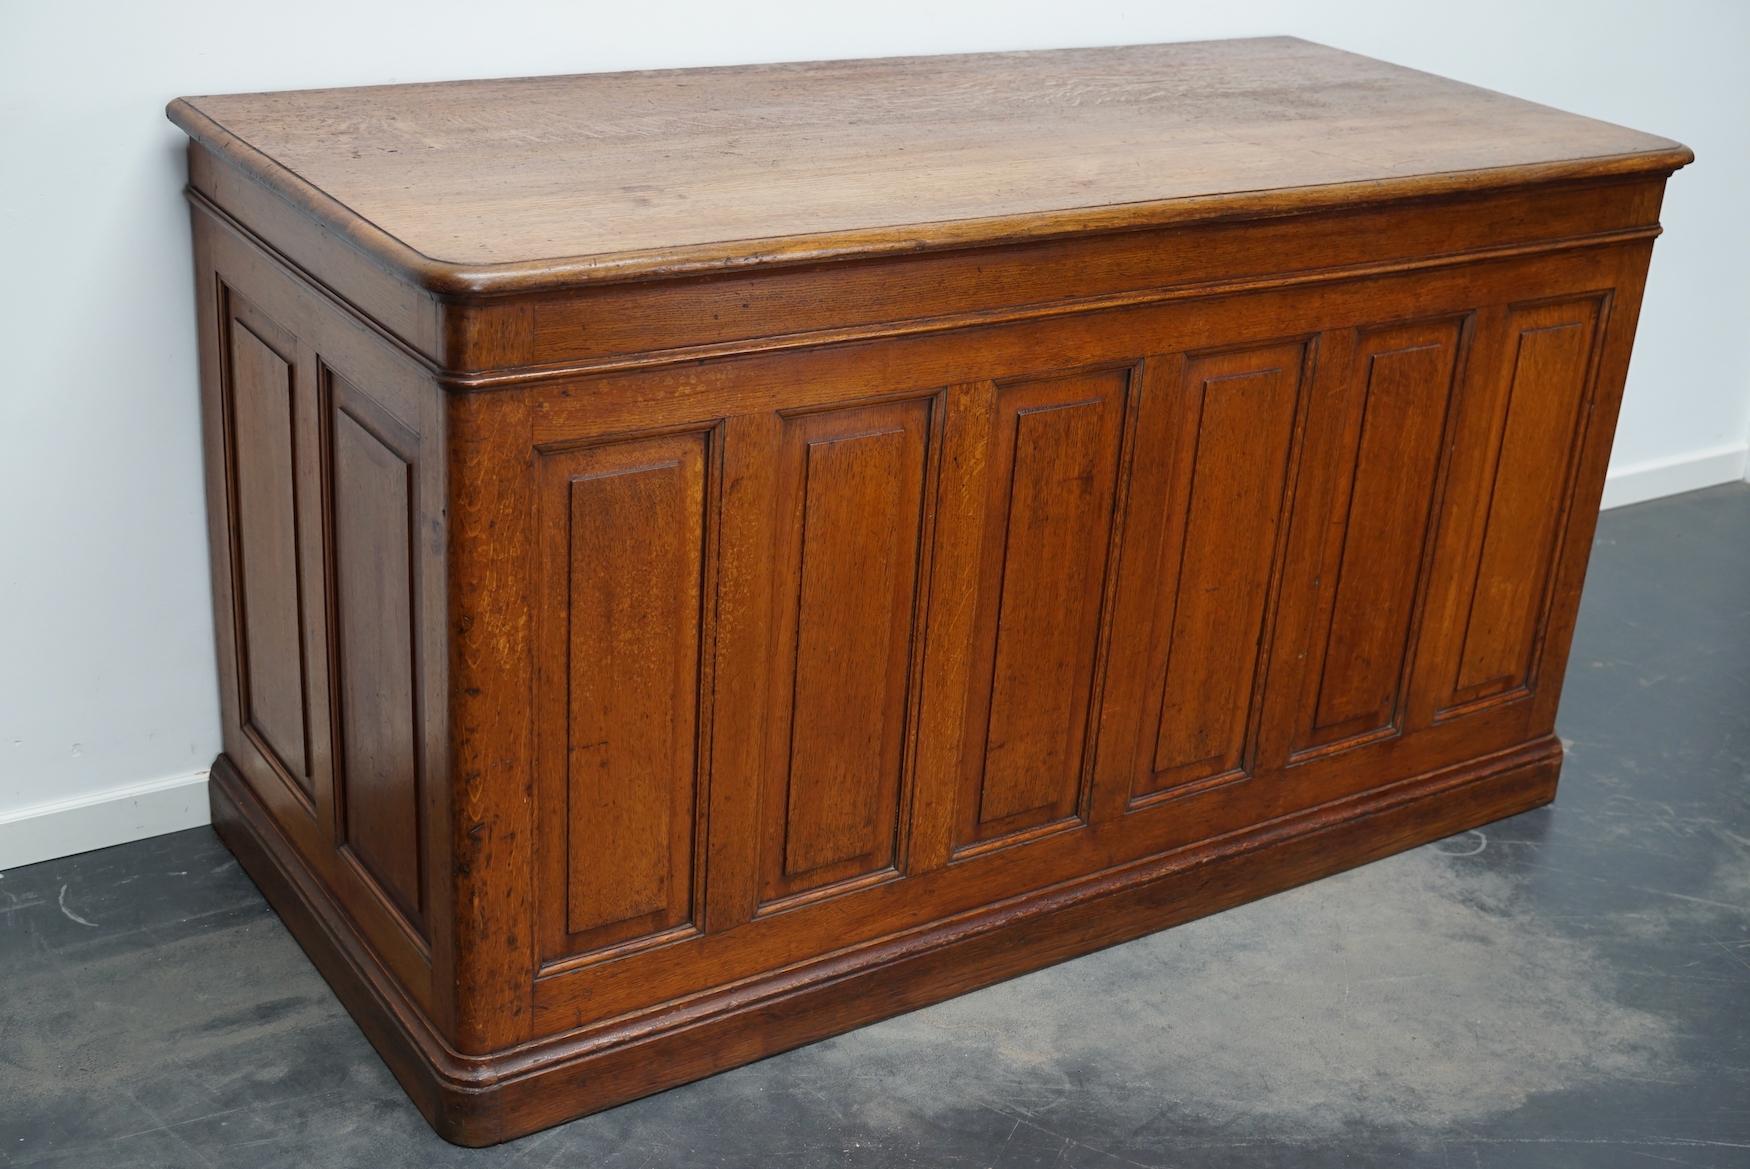 Early 20th Century Antique French Oak Shop Counter Cabinet / Bank of Drawers, circa 1900s